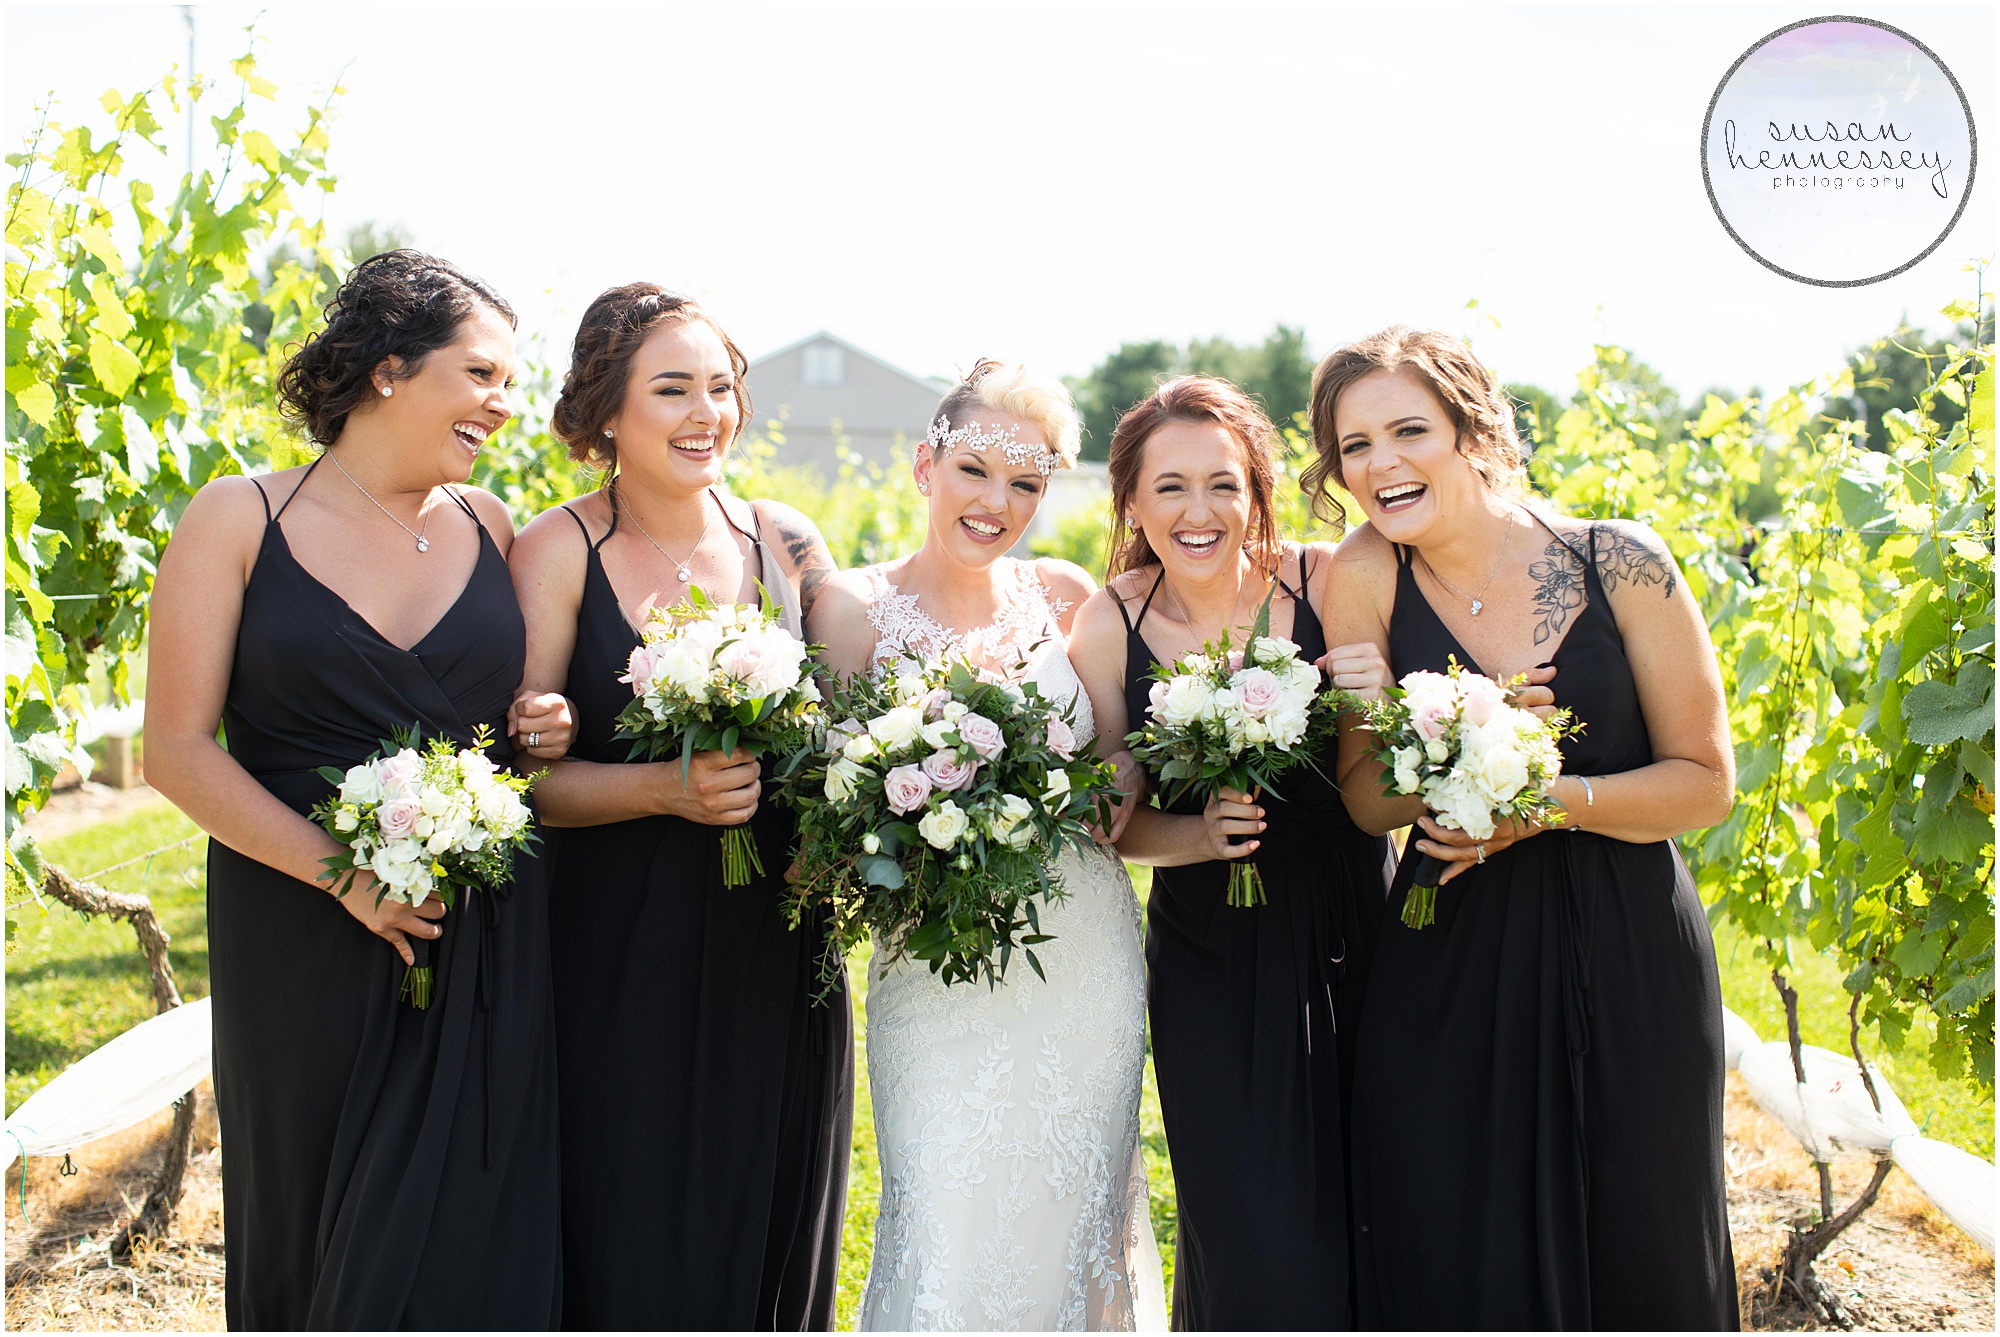 Bride and Bridesmaids laugh on wedding day